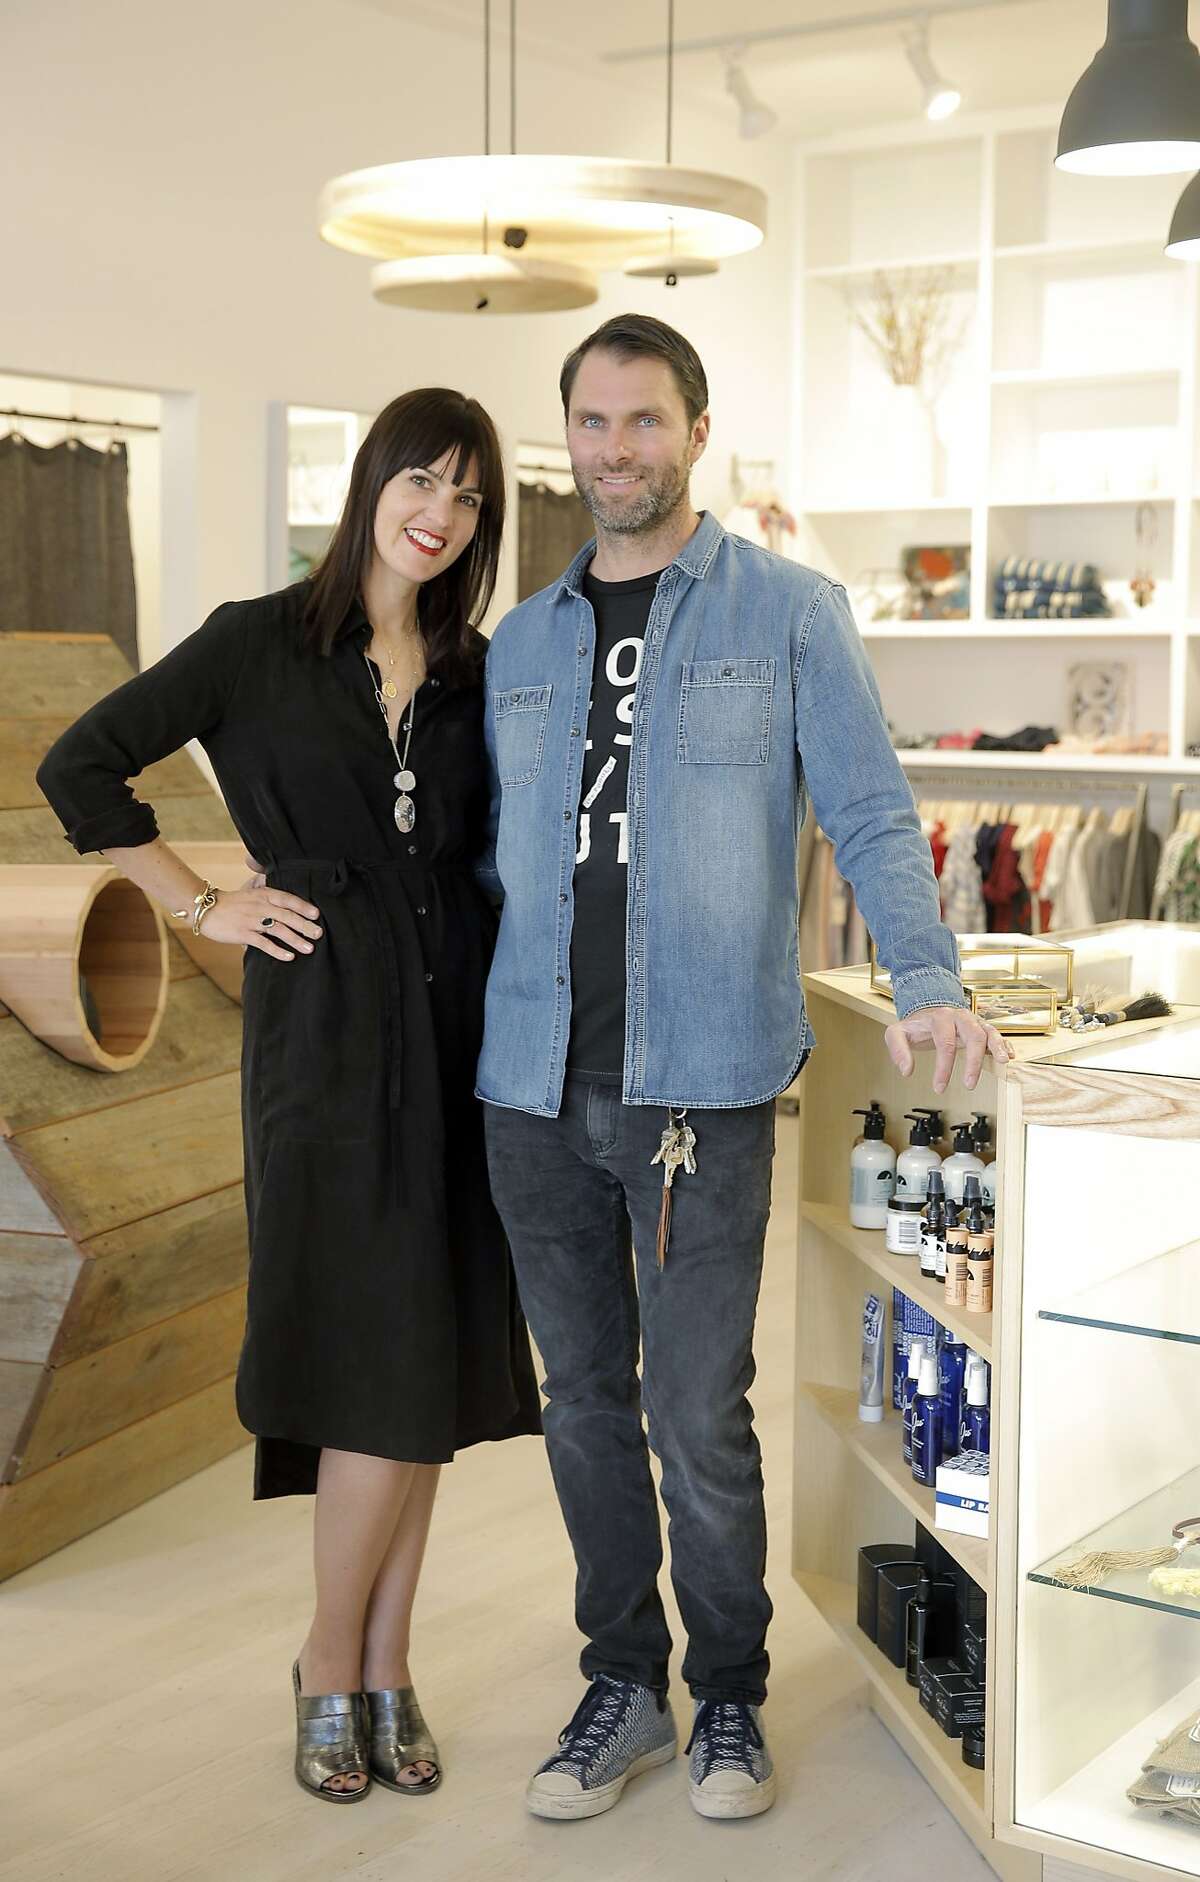 Lauren and Josh Podolls, the owners of Podolls on 24th Street in San Francisco, Calif., on the day they opened the store, Thursday, March 5, 2015.